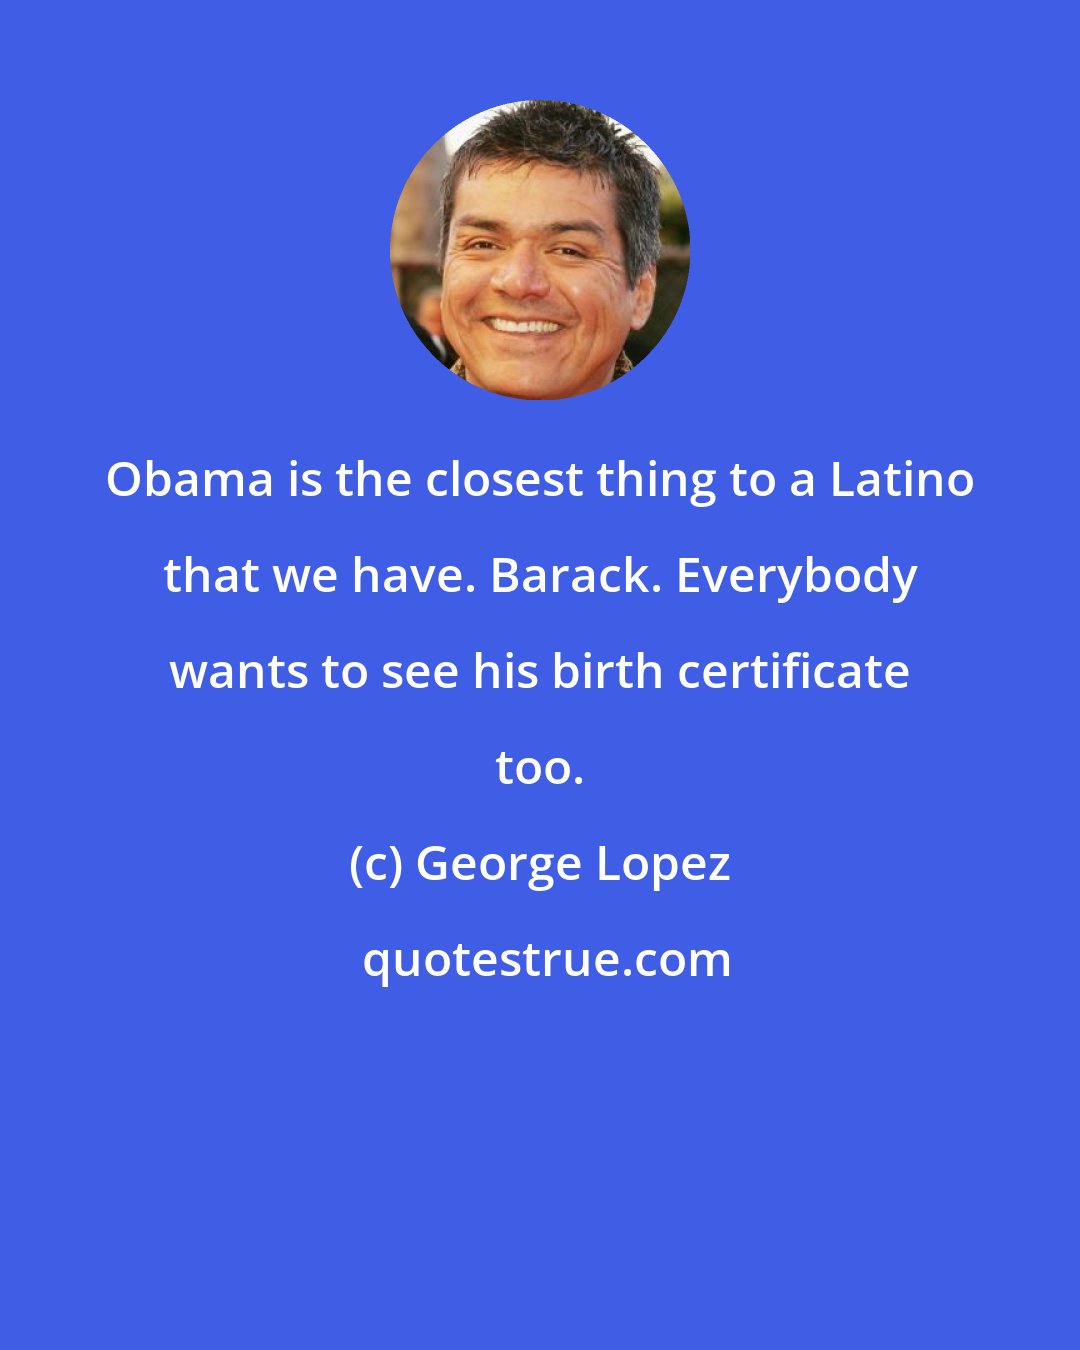 George Lopez: Obama is the closest thing to a Latino that we have. Barack. Everybody wants to see his birth certificate too.